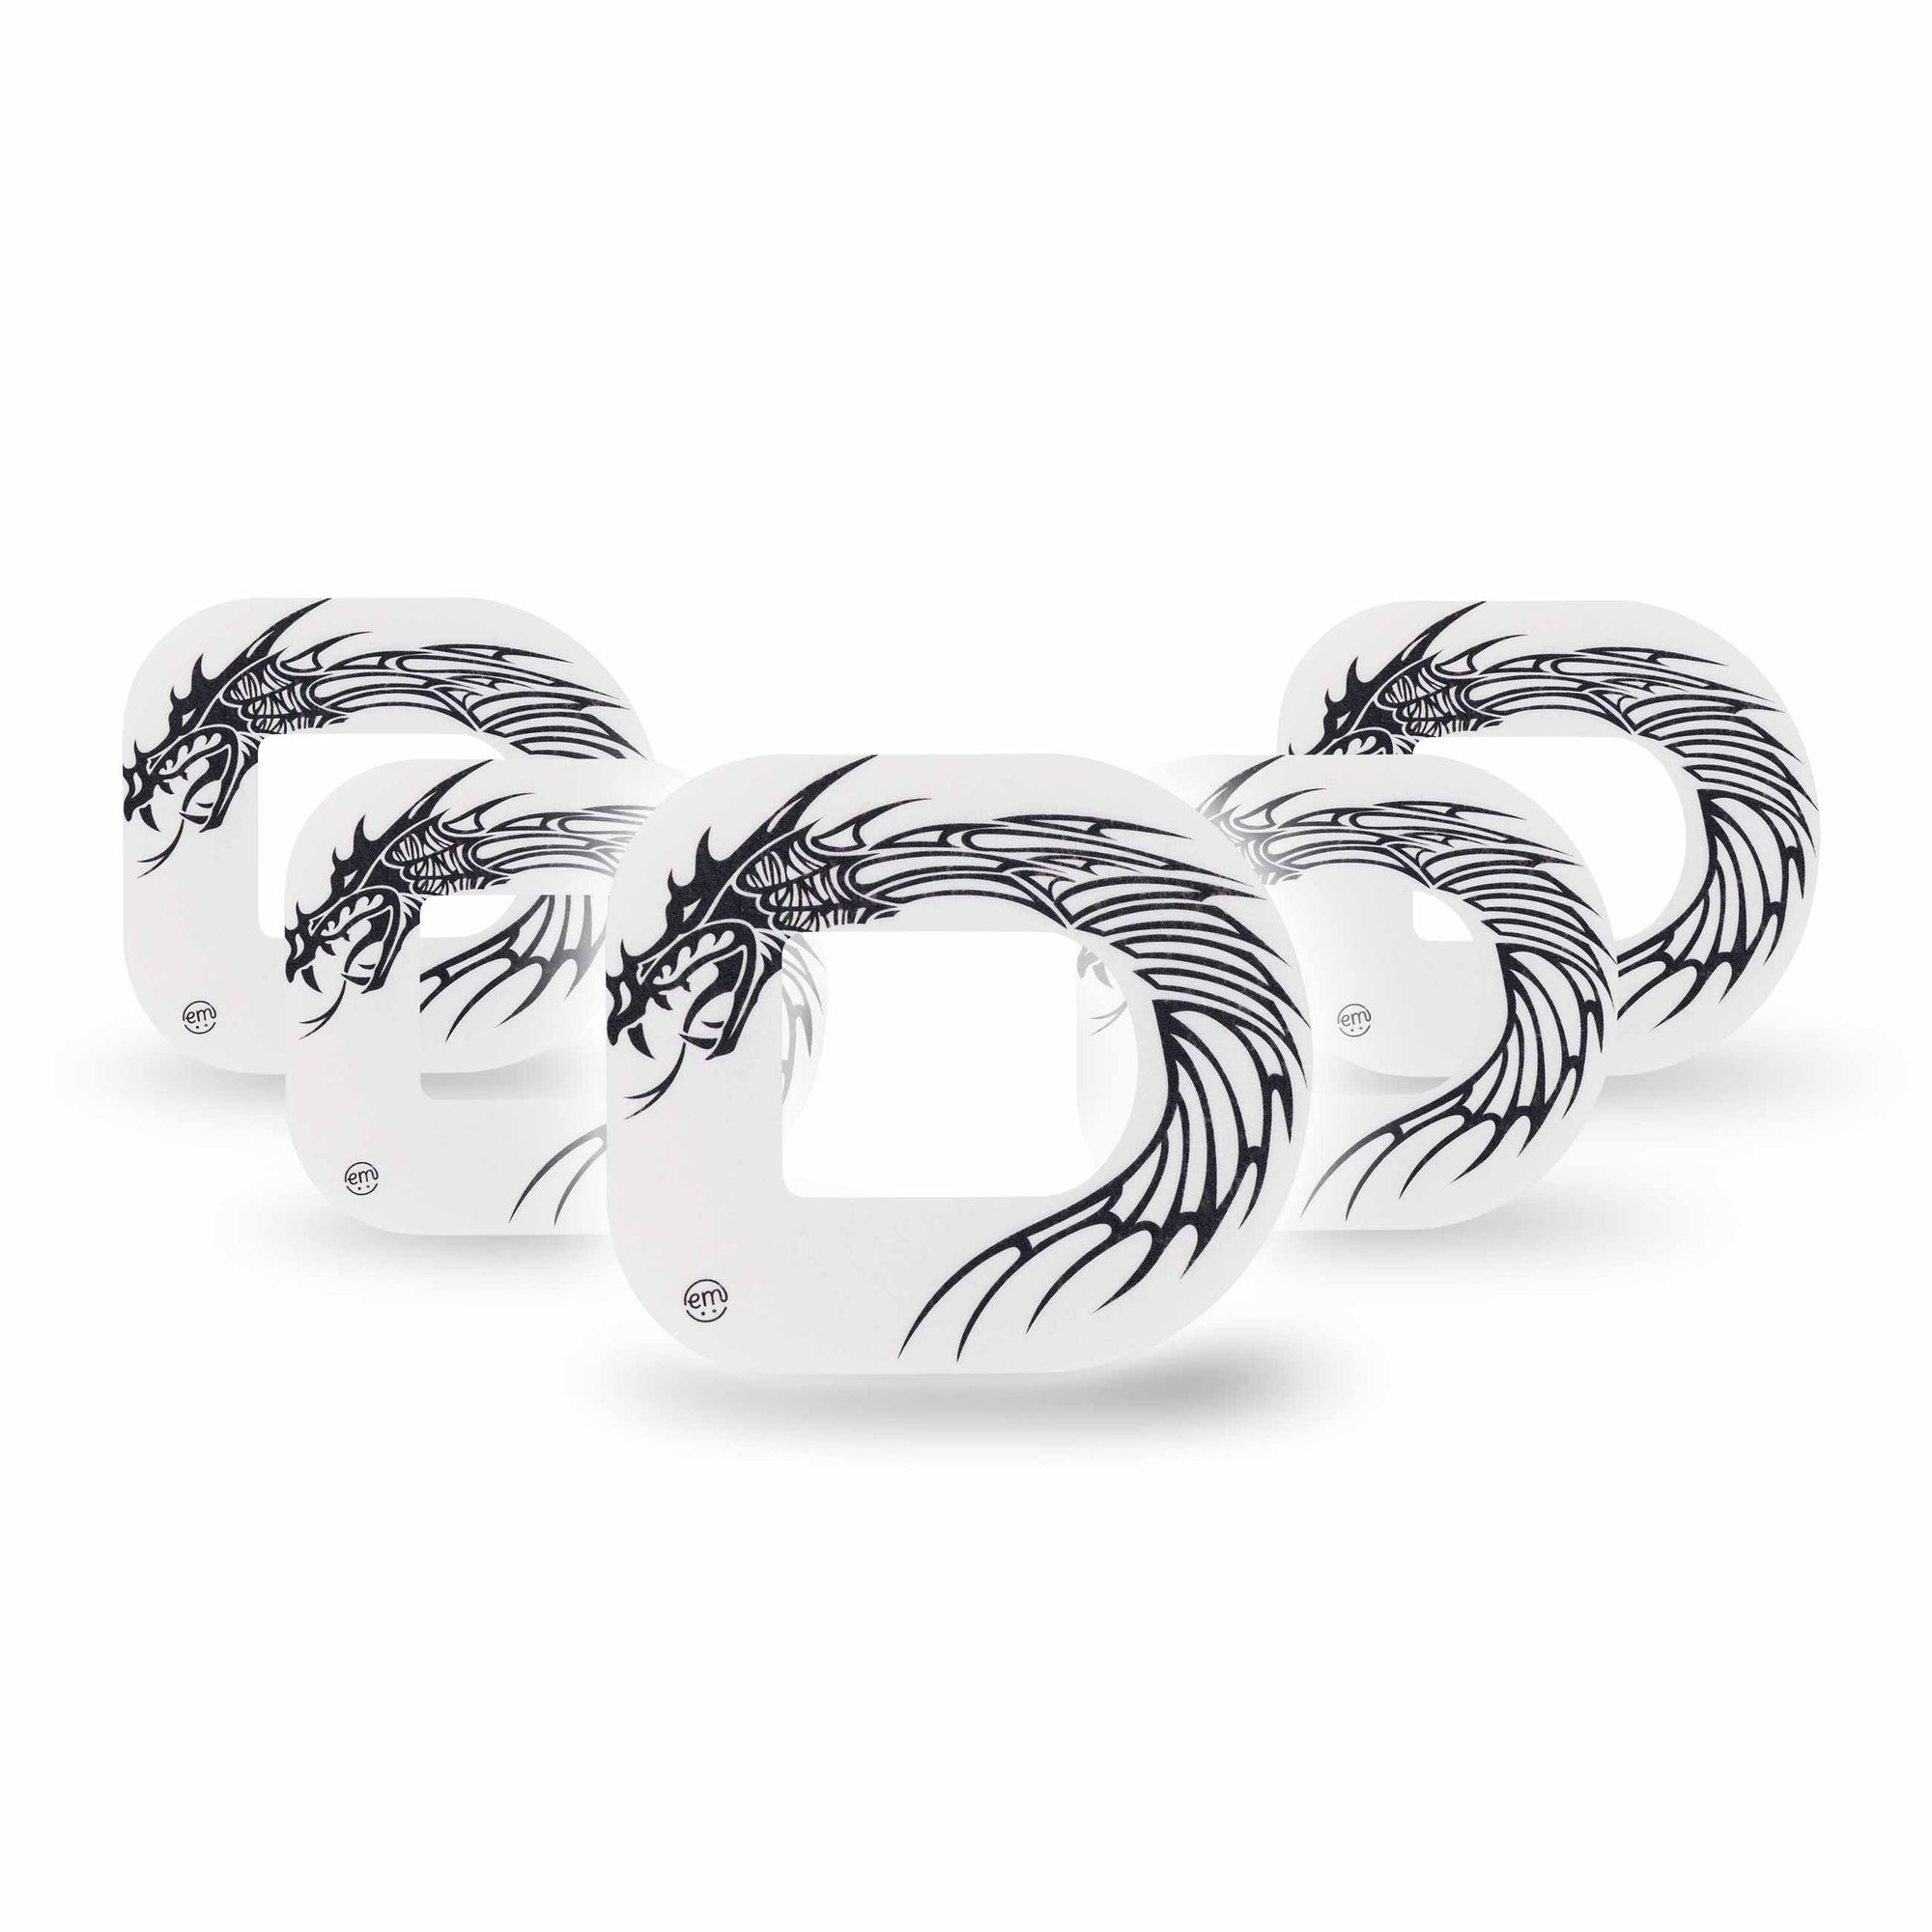 ExpressionMed Black and White Dragon Pod Tape 5-Pack